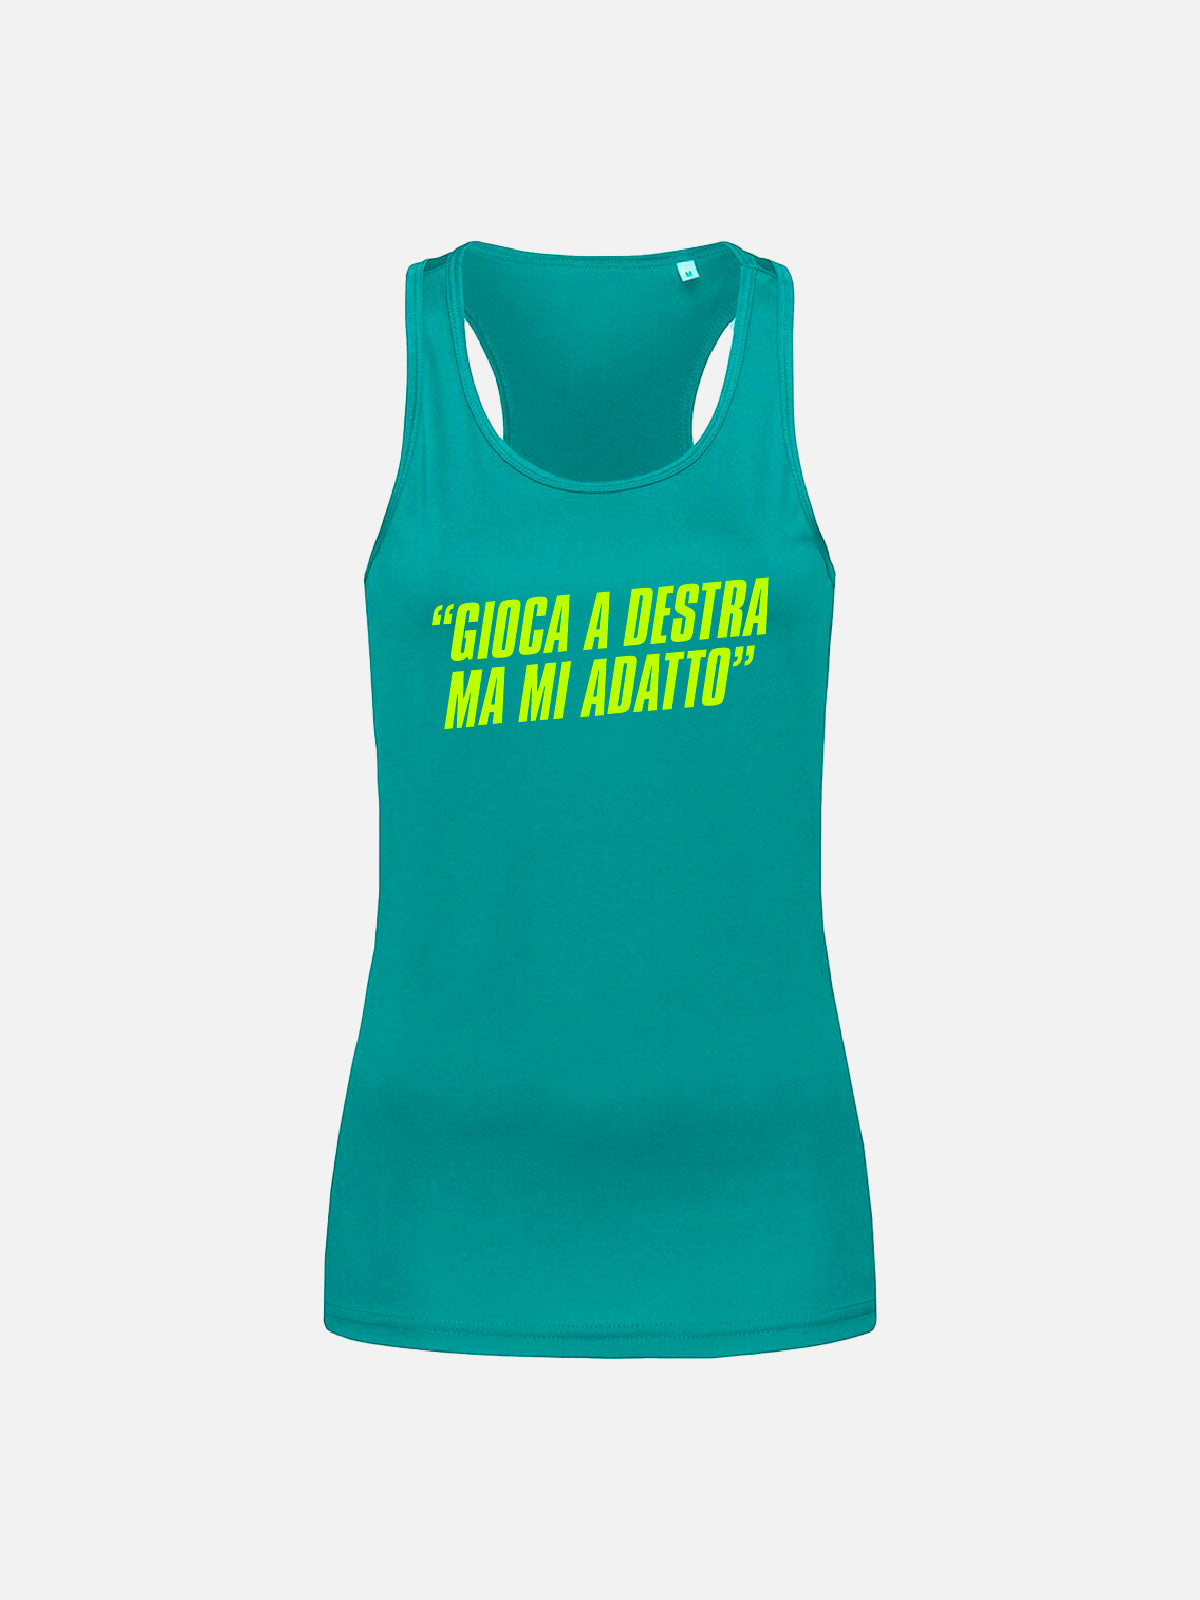 Customized Tank Top - “I Play Right But I Adapt”